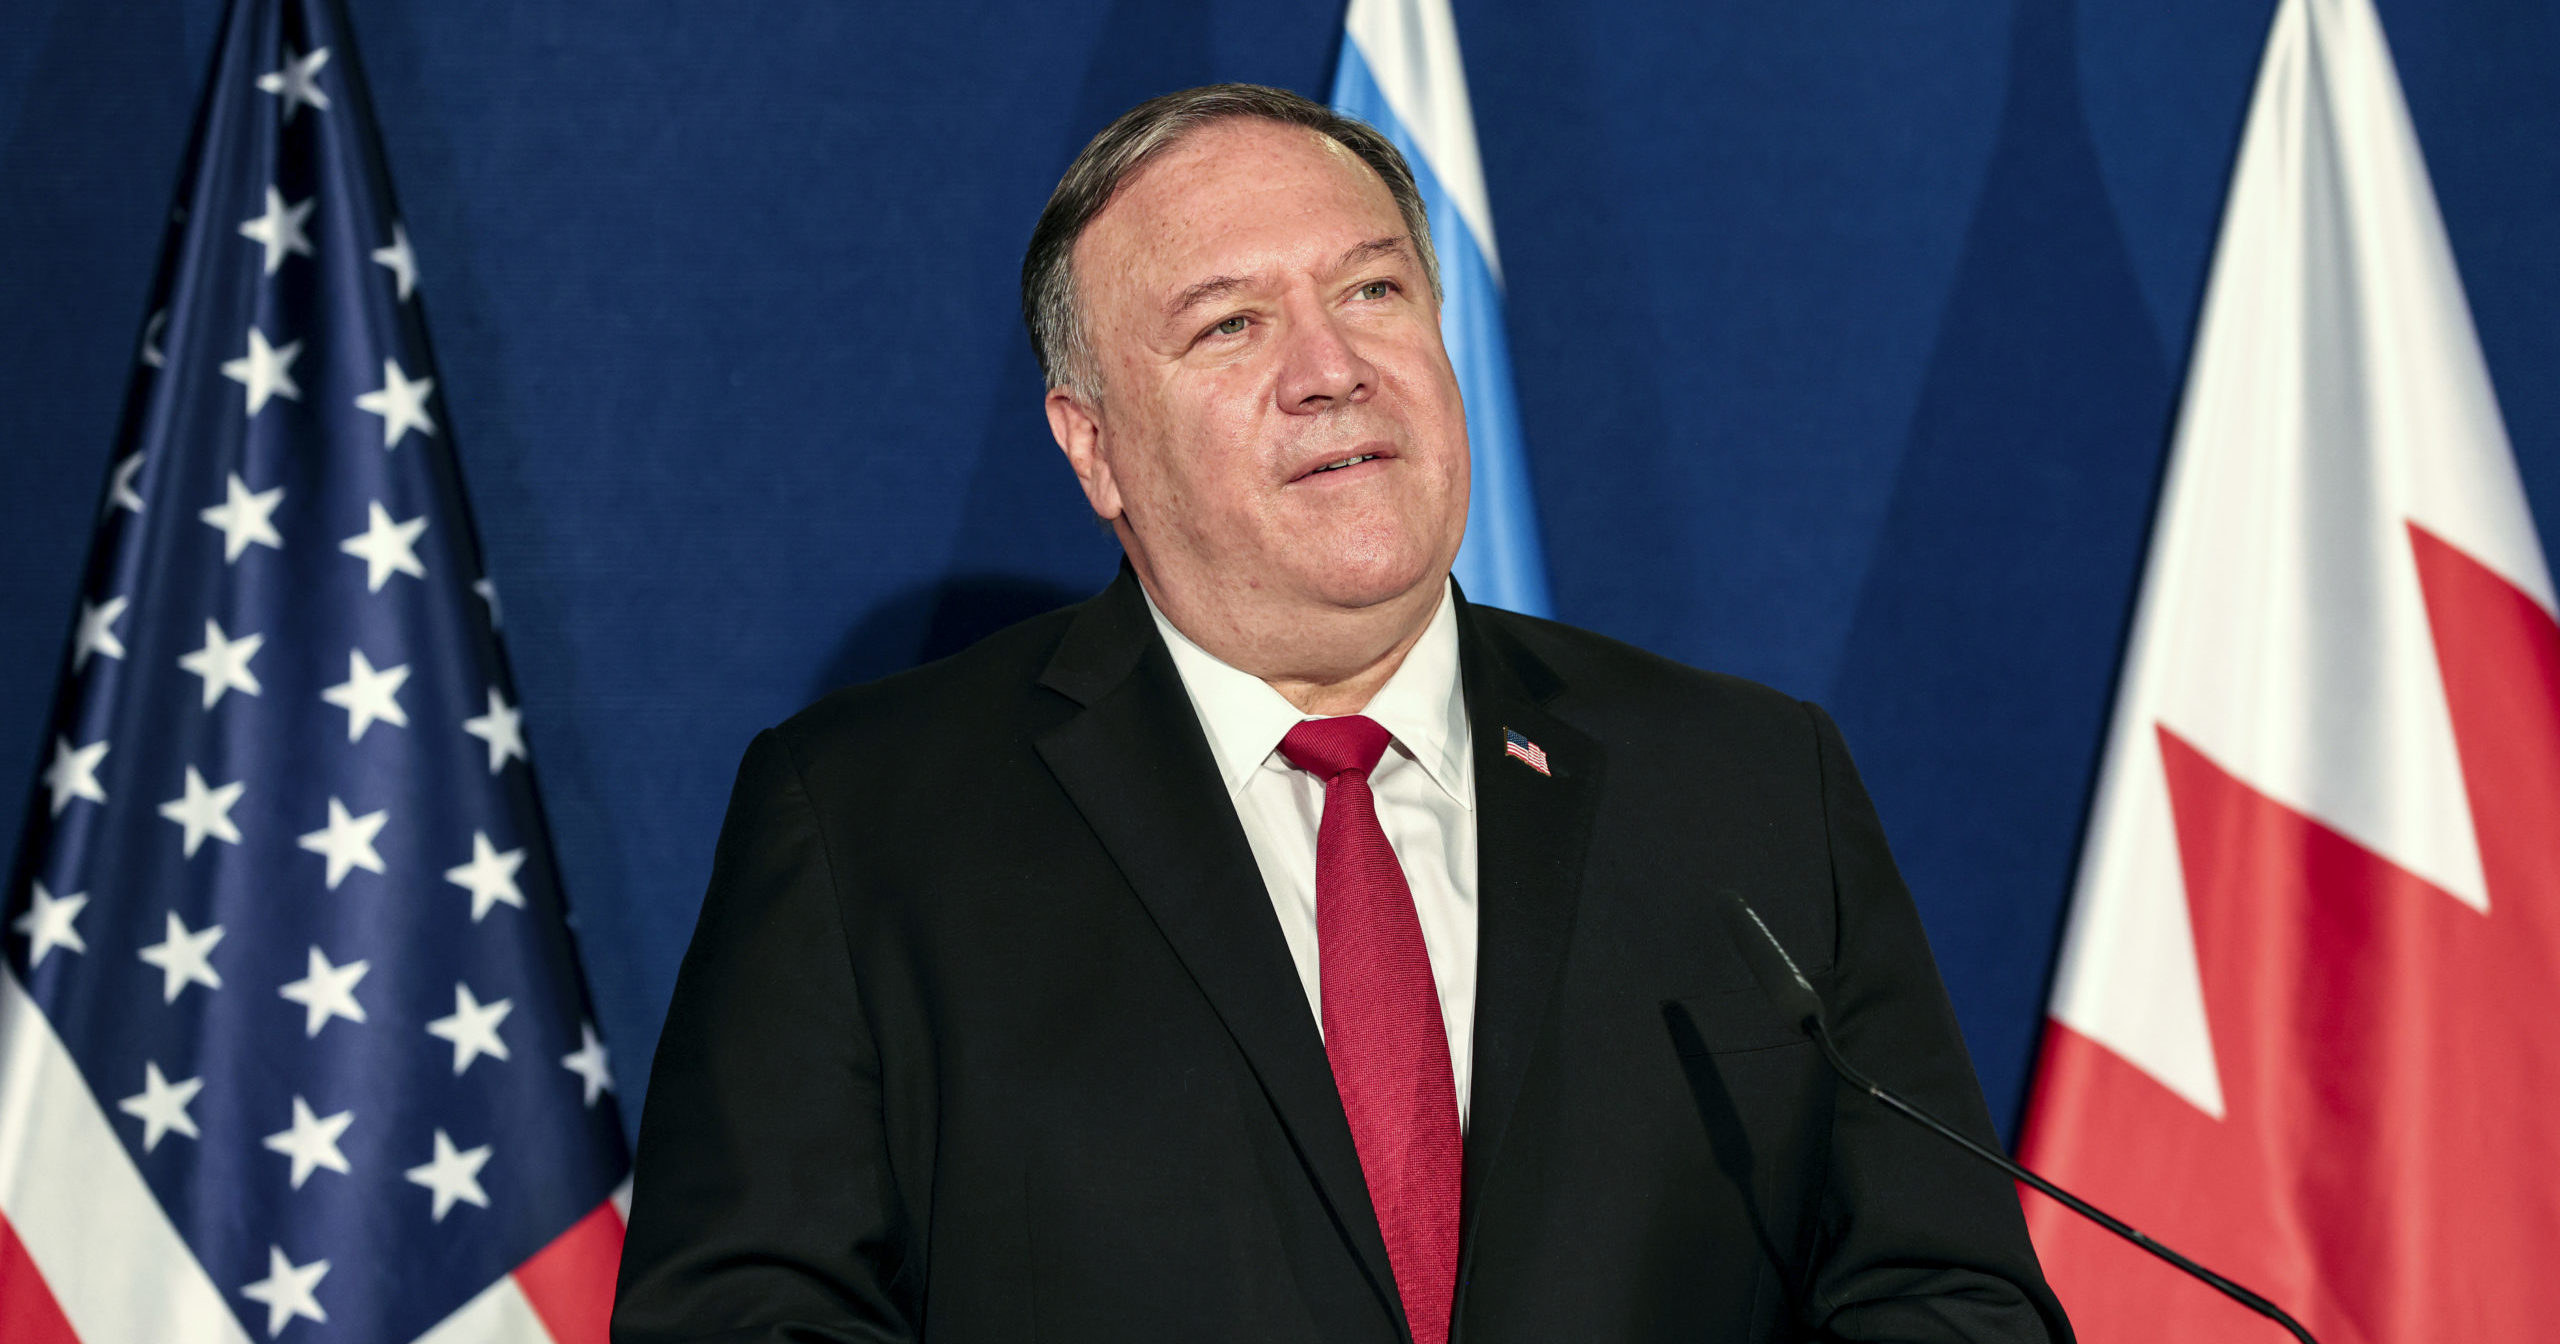 Secretary of State Mike Pompeo looks on during a news conference with the Israeli prime minister and Bahrain's foreign minister after their meeting in Jerusalem on Nov. 18, 2020.